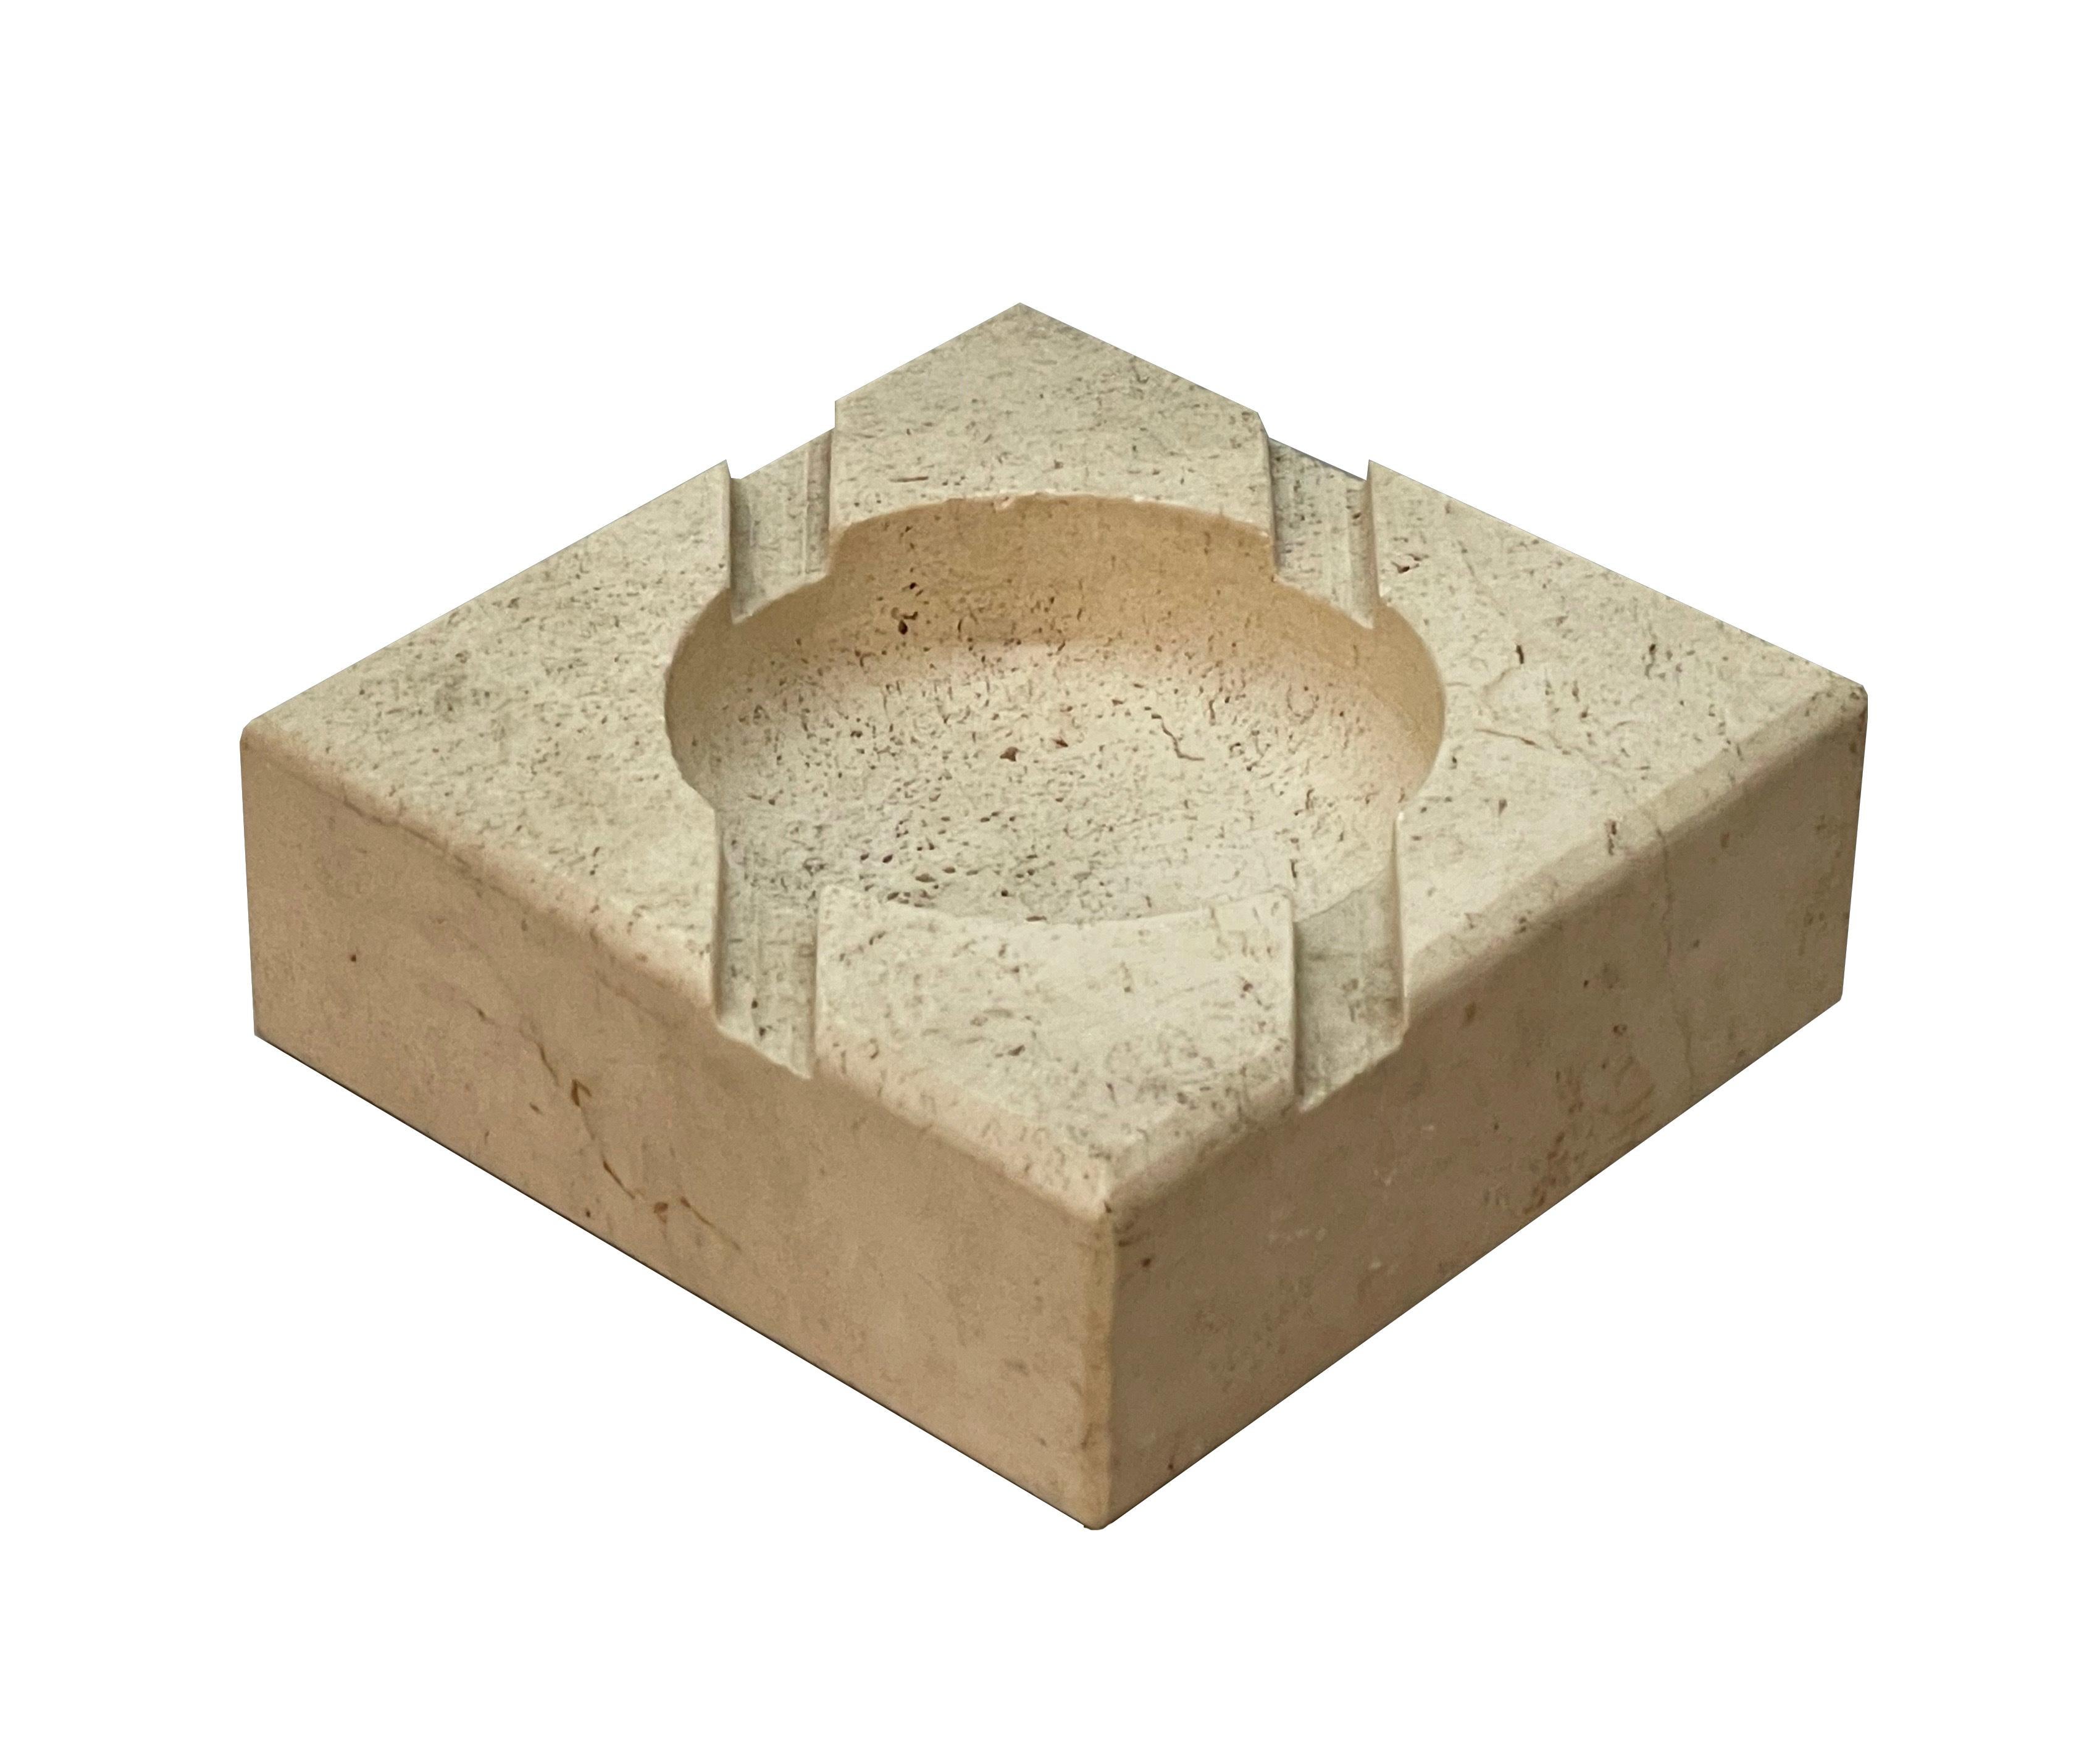 Midcentury Squared White Travertine Marble Italian Ashtray After Mannelli, 1970s For Sale 3